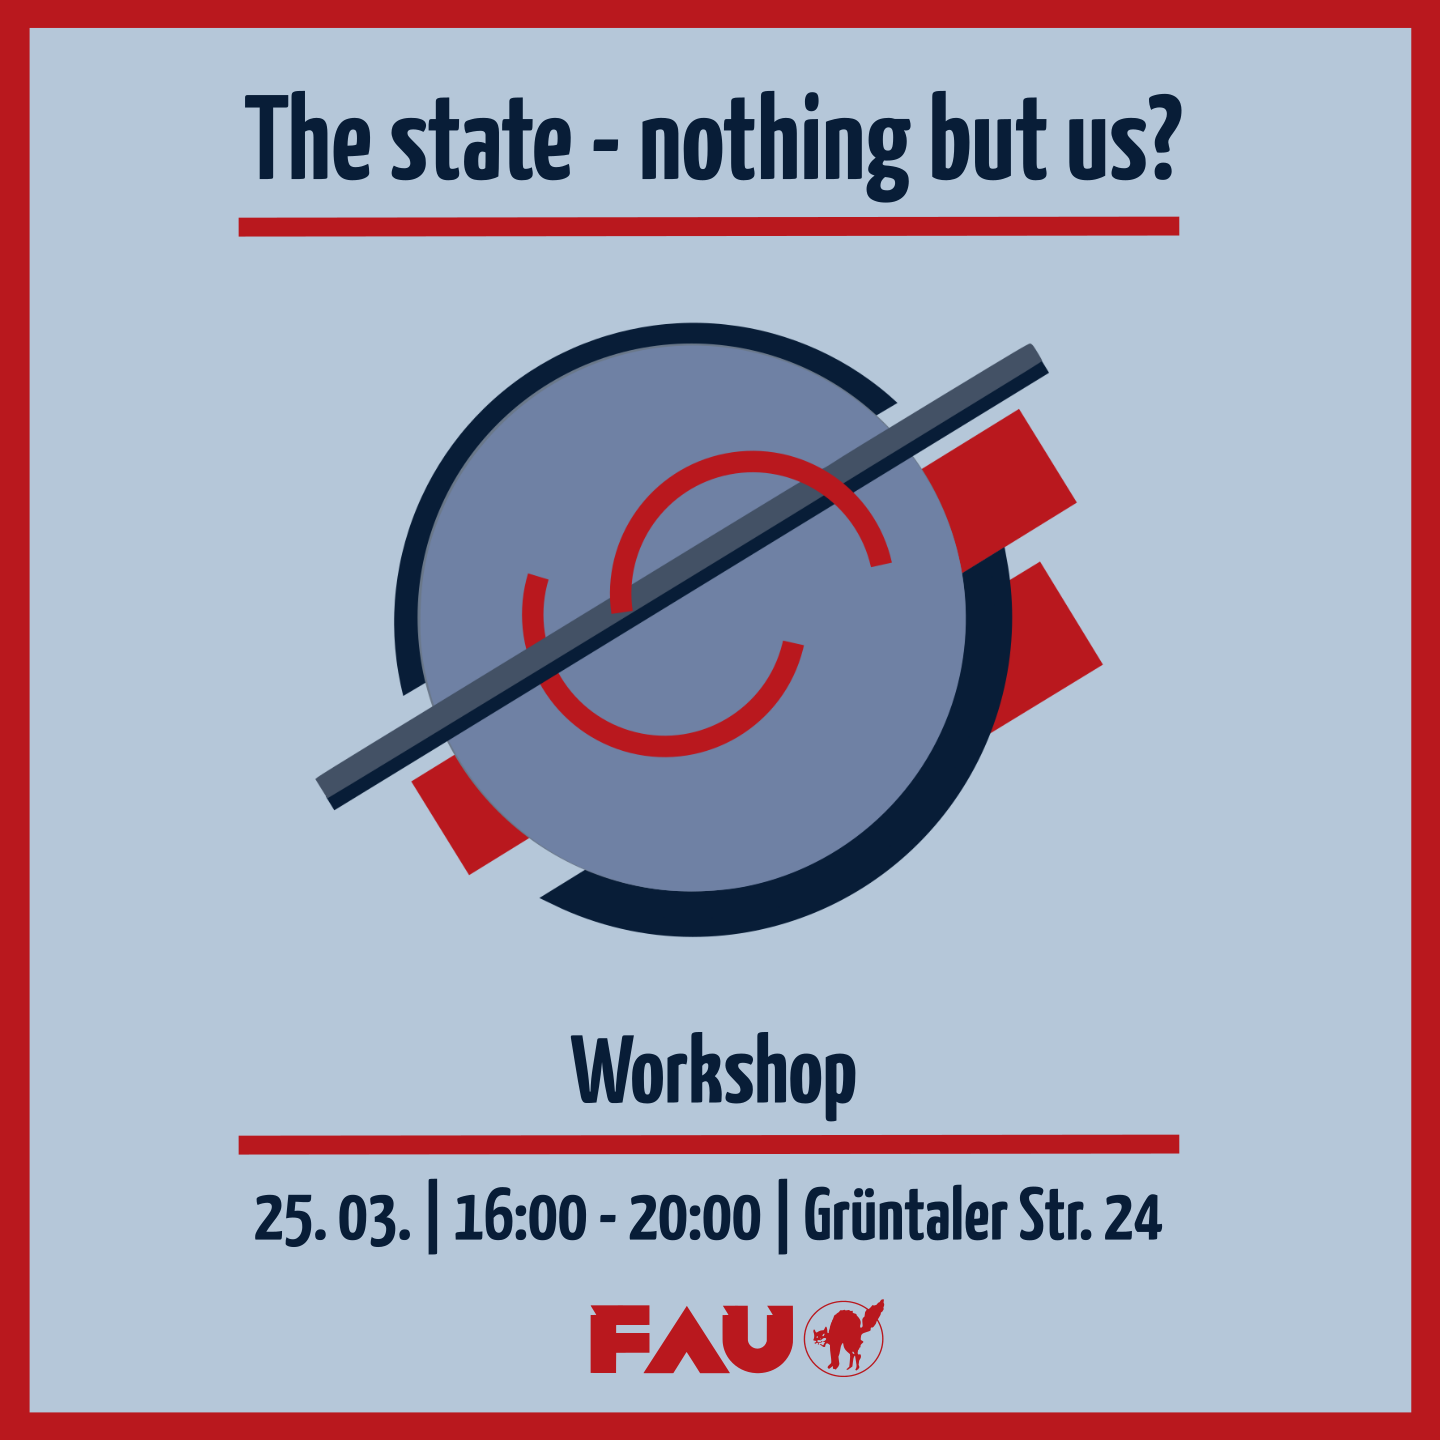 Workshop: The state - nothing but us? 25 March 2023, 16:00 to 20:00 p.m. Grüntaler Str. 24